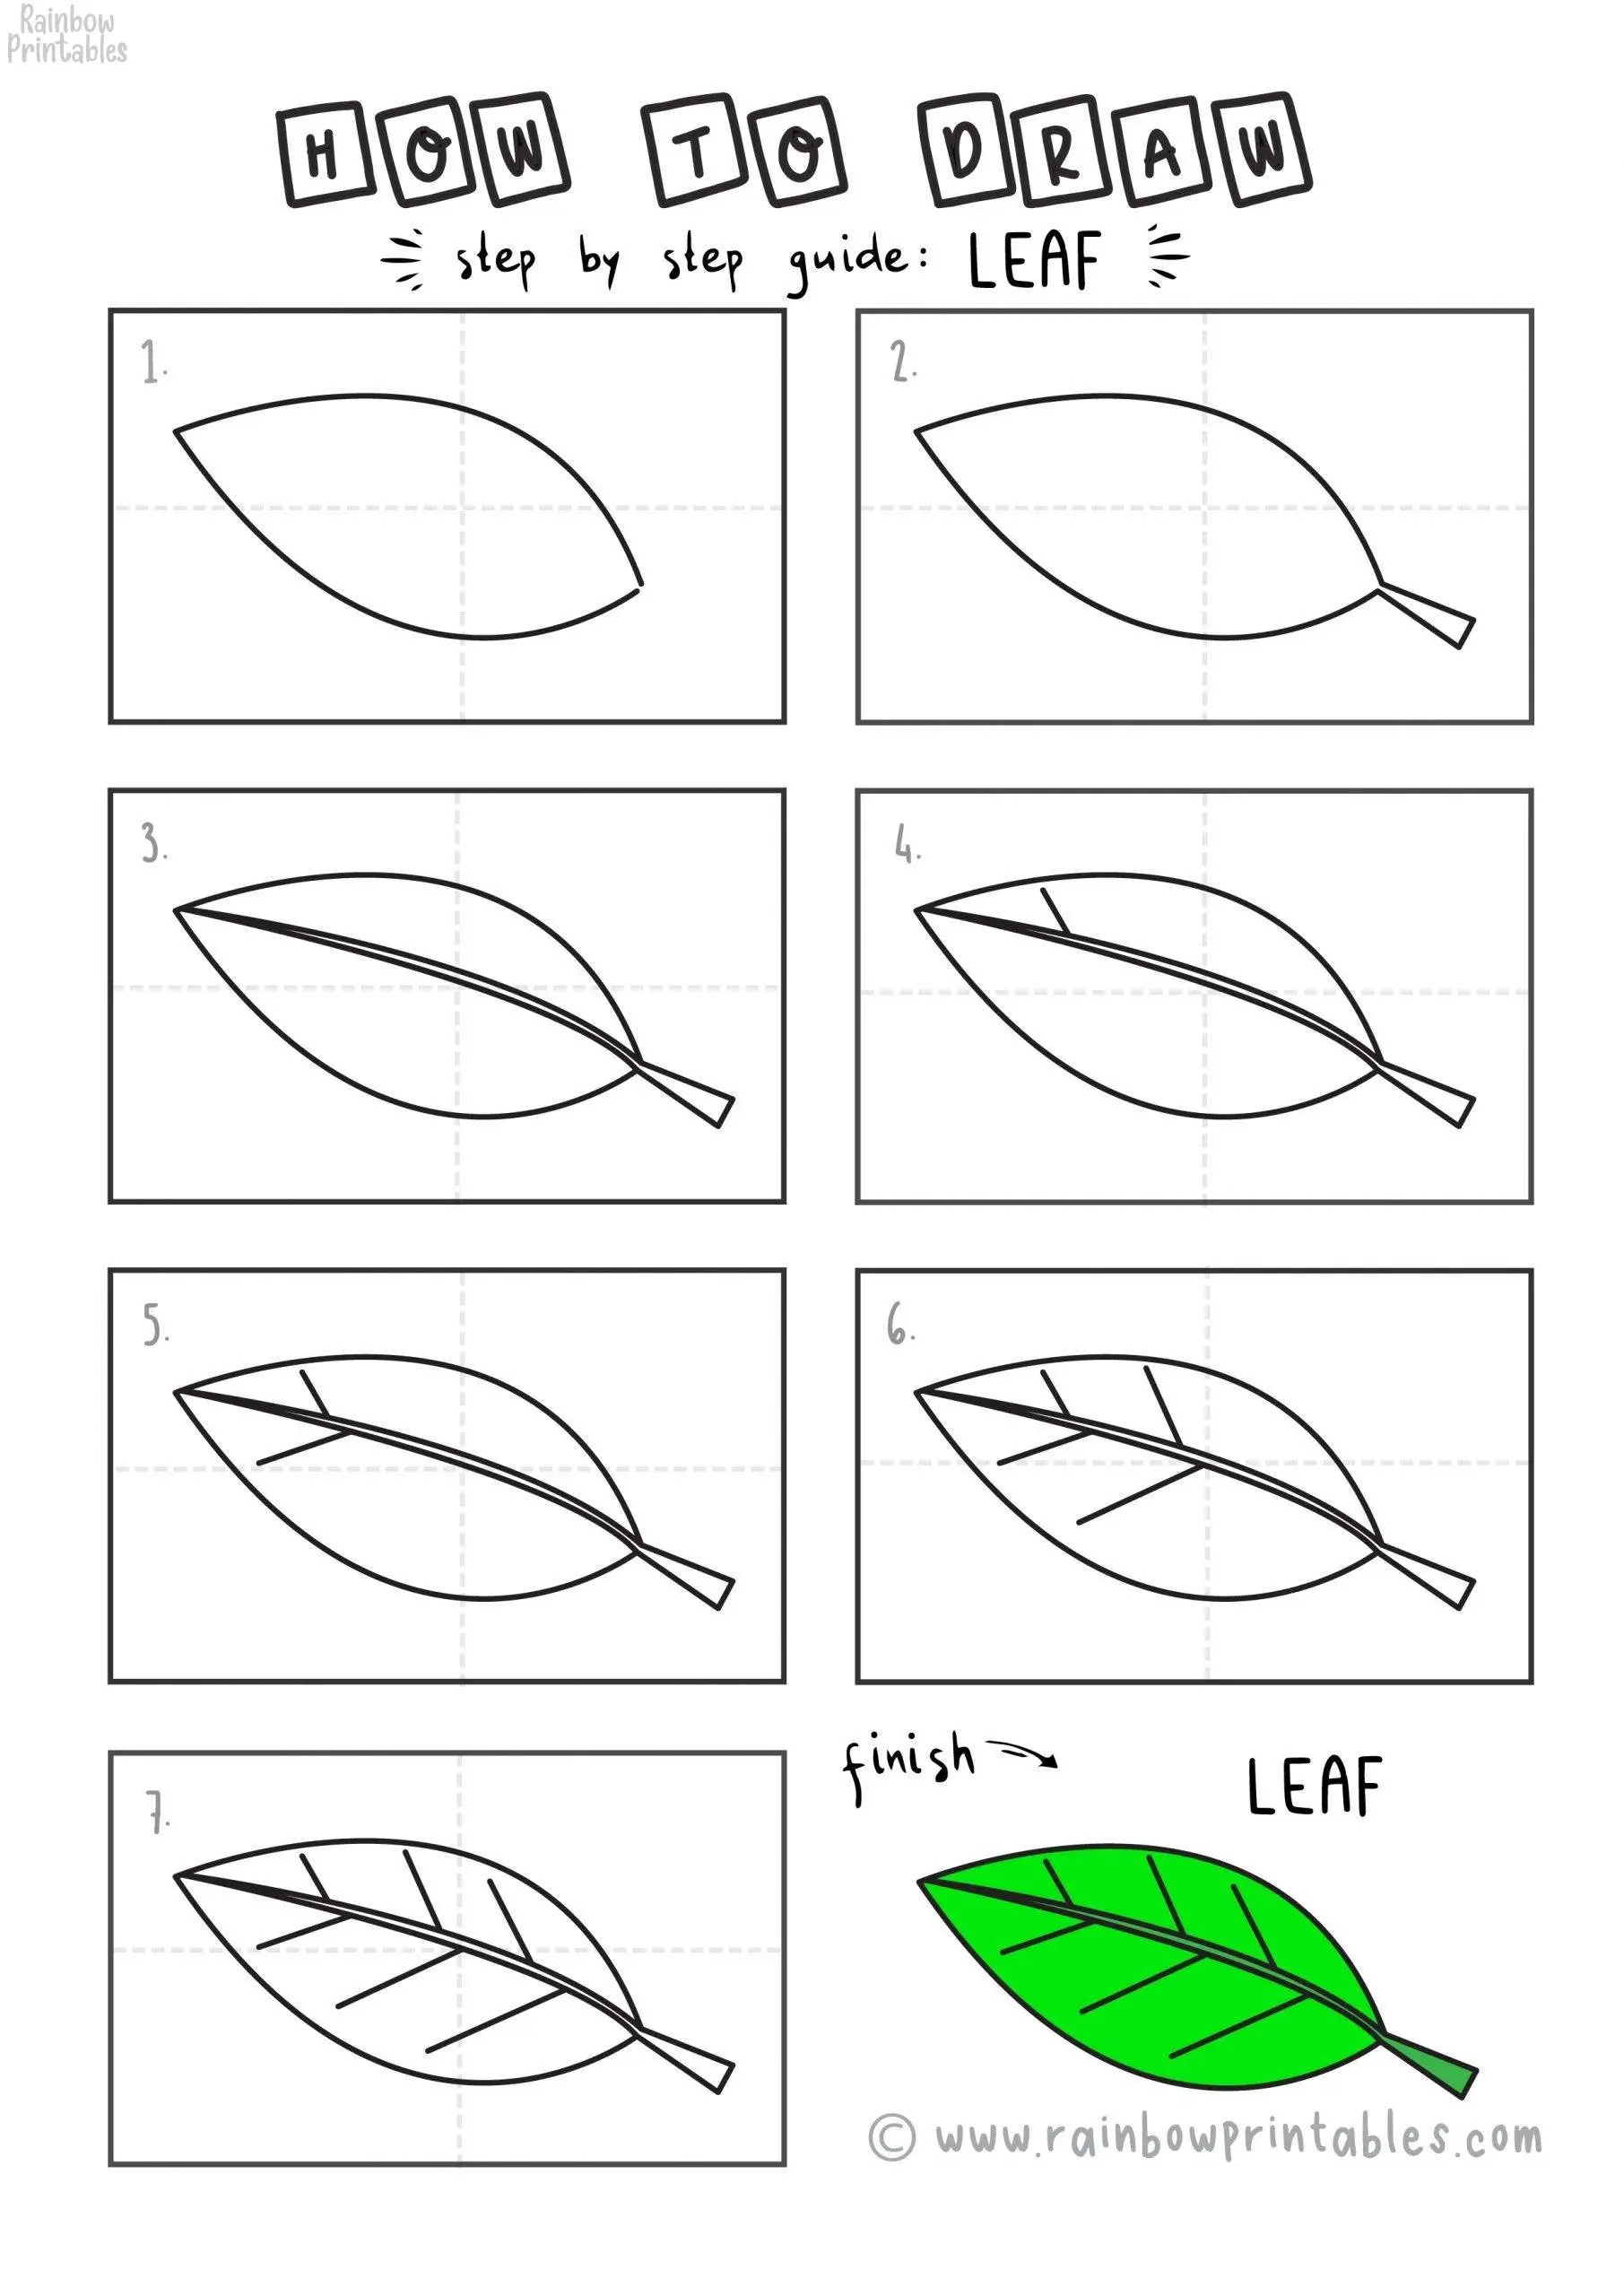 How To Draw a NATURE LEAVES Step by Step for Beginners and Kids | Easy and Simple | Printable Drawing Worksheet